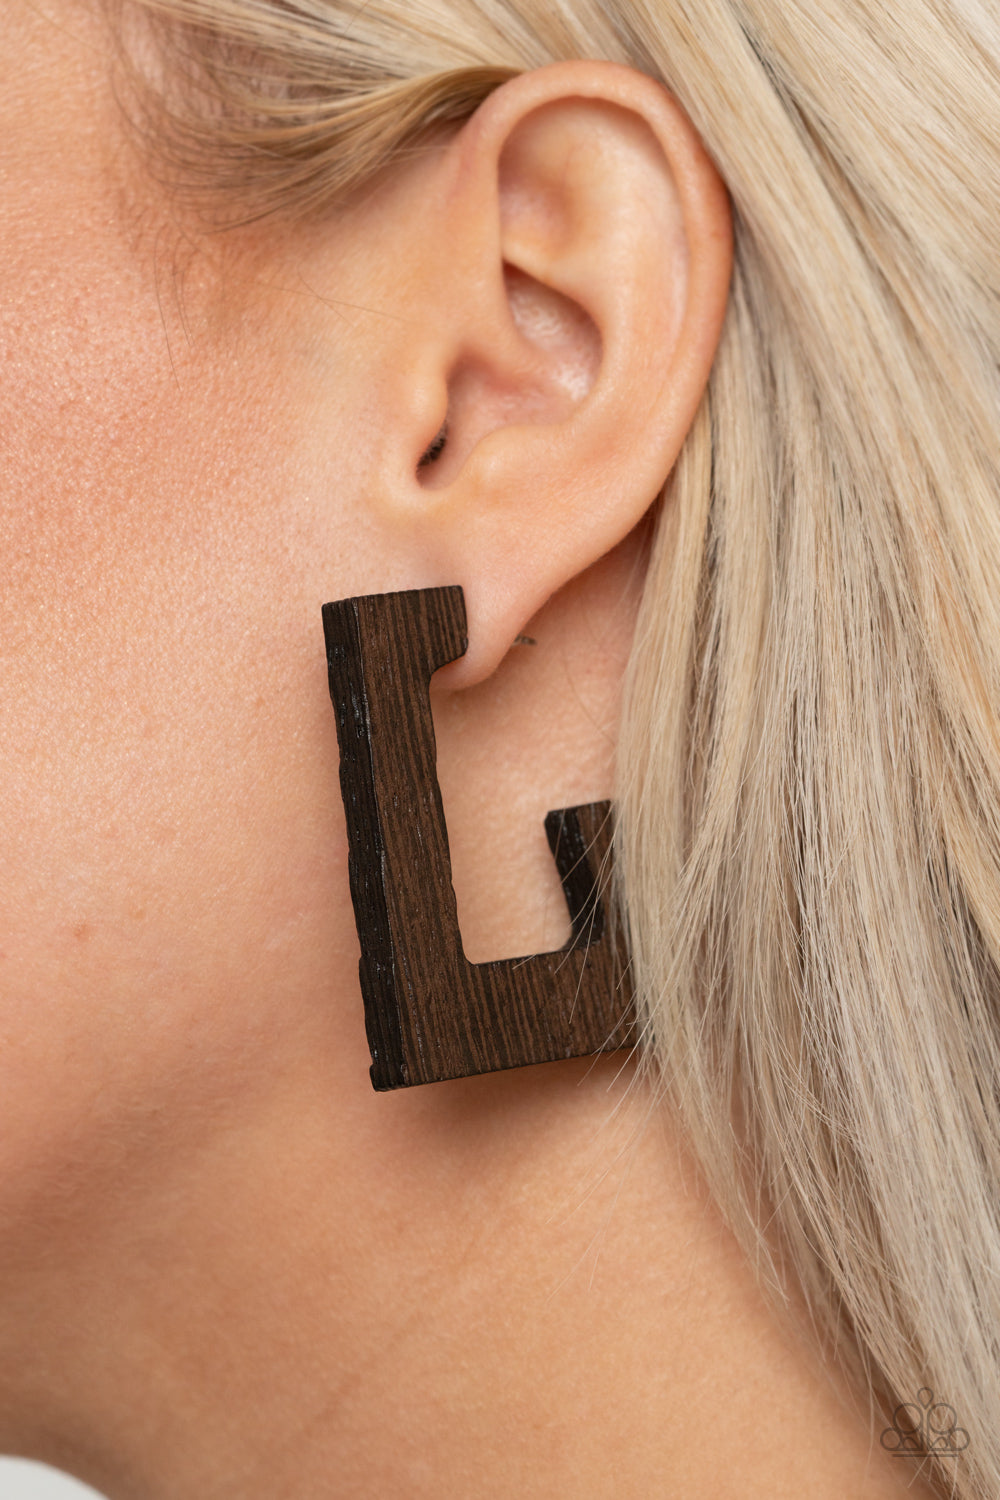 Paparazzi Accessories - The Girl Next OUTDOOR - #E366 Brown Earrings